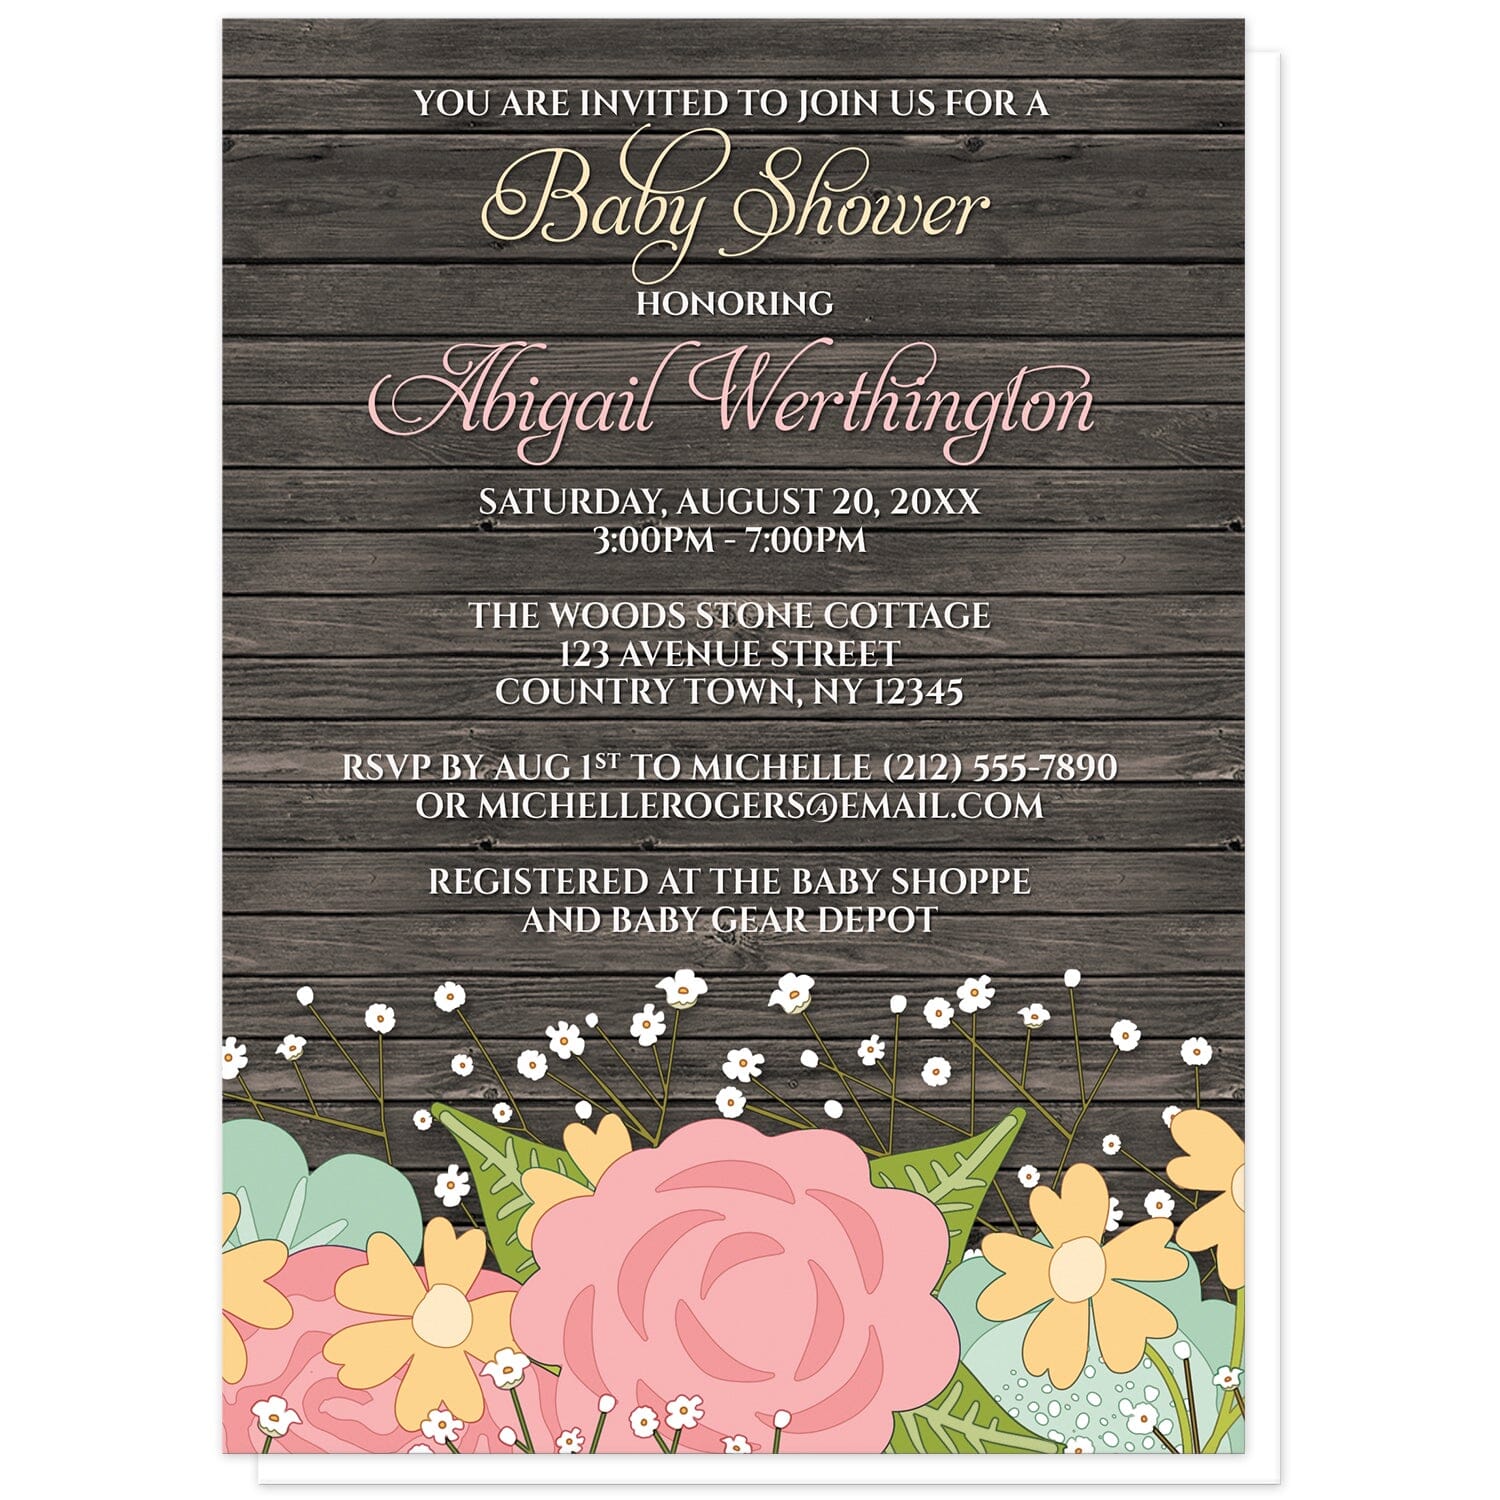 Rustic Floral Wood Baby's Breath Baby Shower Invitations at Artistically Invited. Rustic floral wood baby's breath baby shower invitations with a pink and teal floral theme featuring orange flowers, green leaves, and baby's breath along the bottom over a dark brown rustic wood pattern illustration. Your personalized baby shower celebration details are custom printed in yellow, pink, and white over the brown wood above the pretty flowers. 